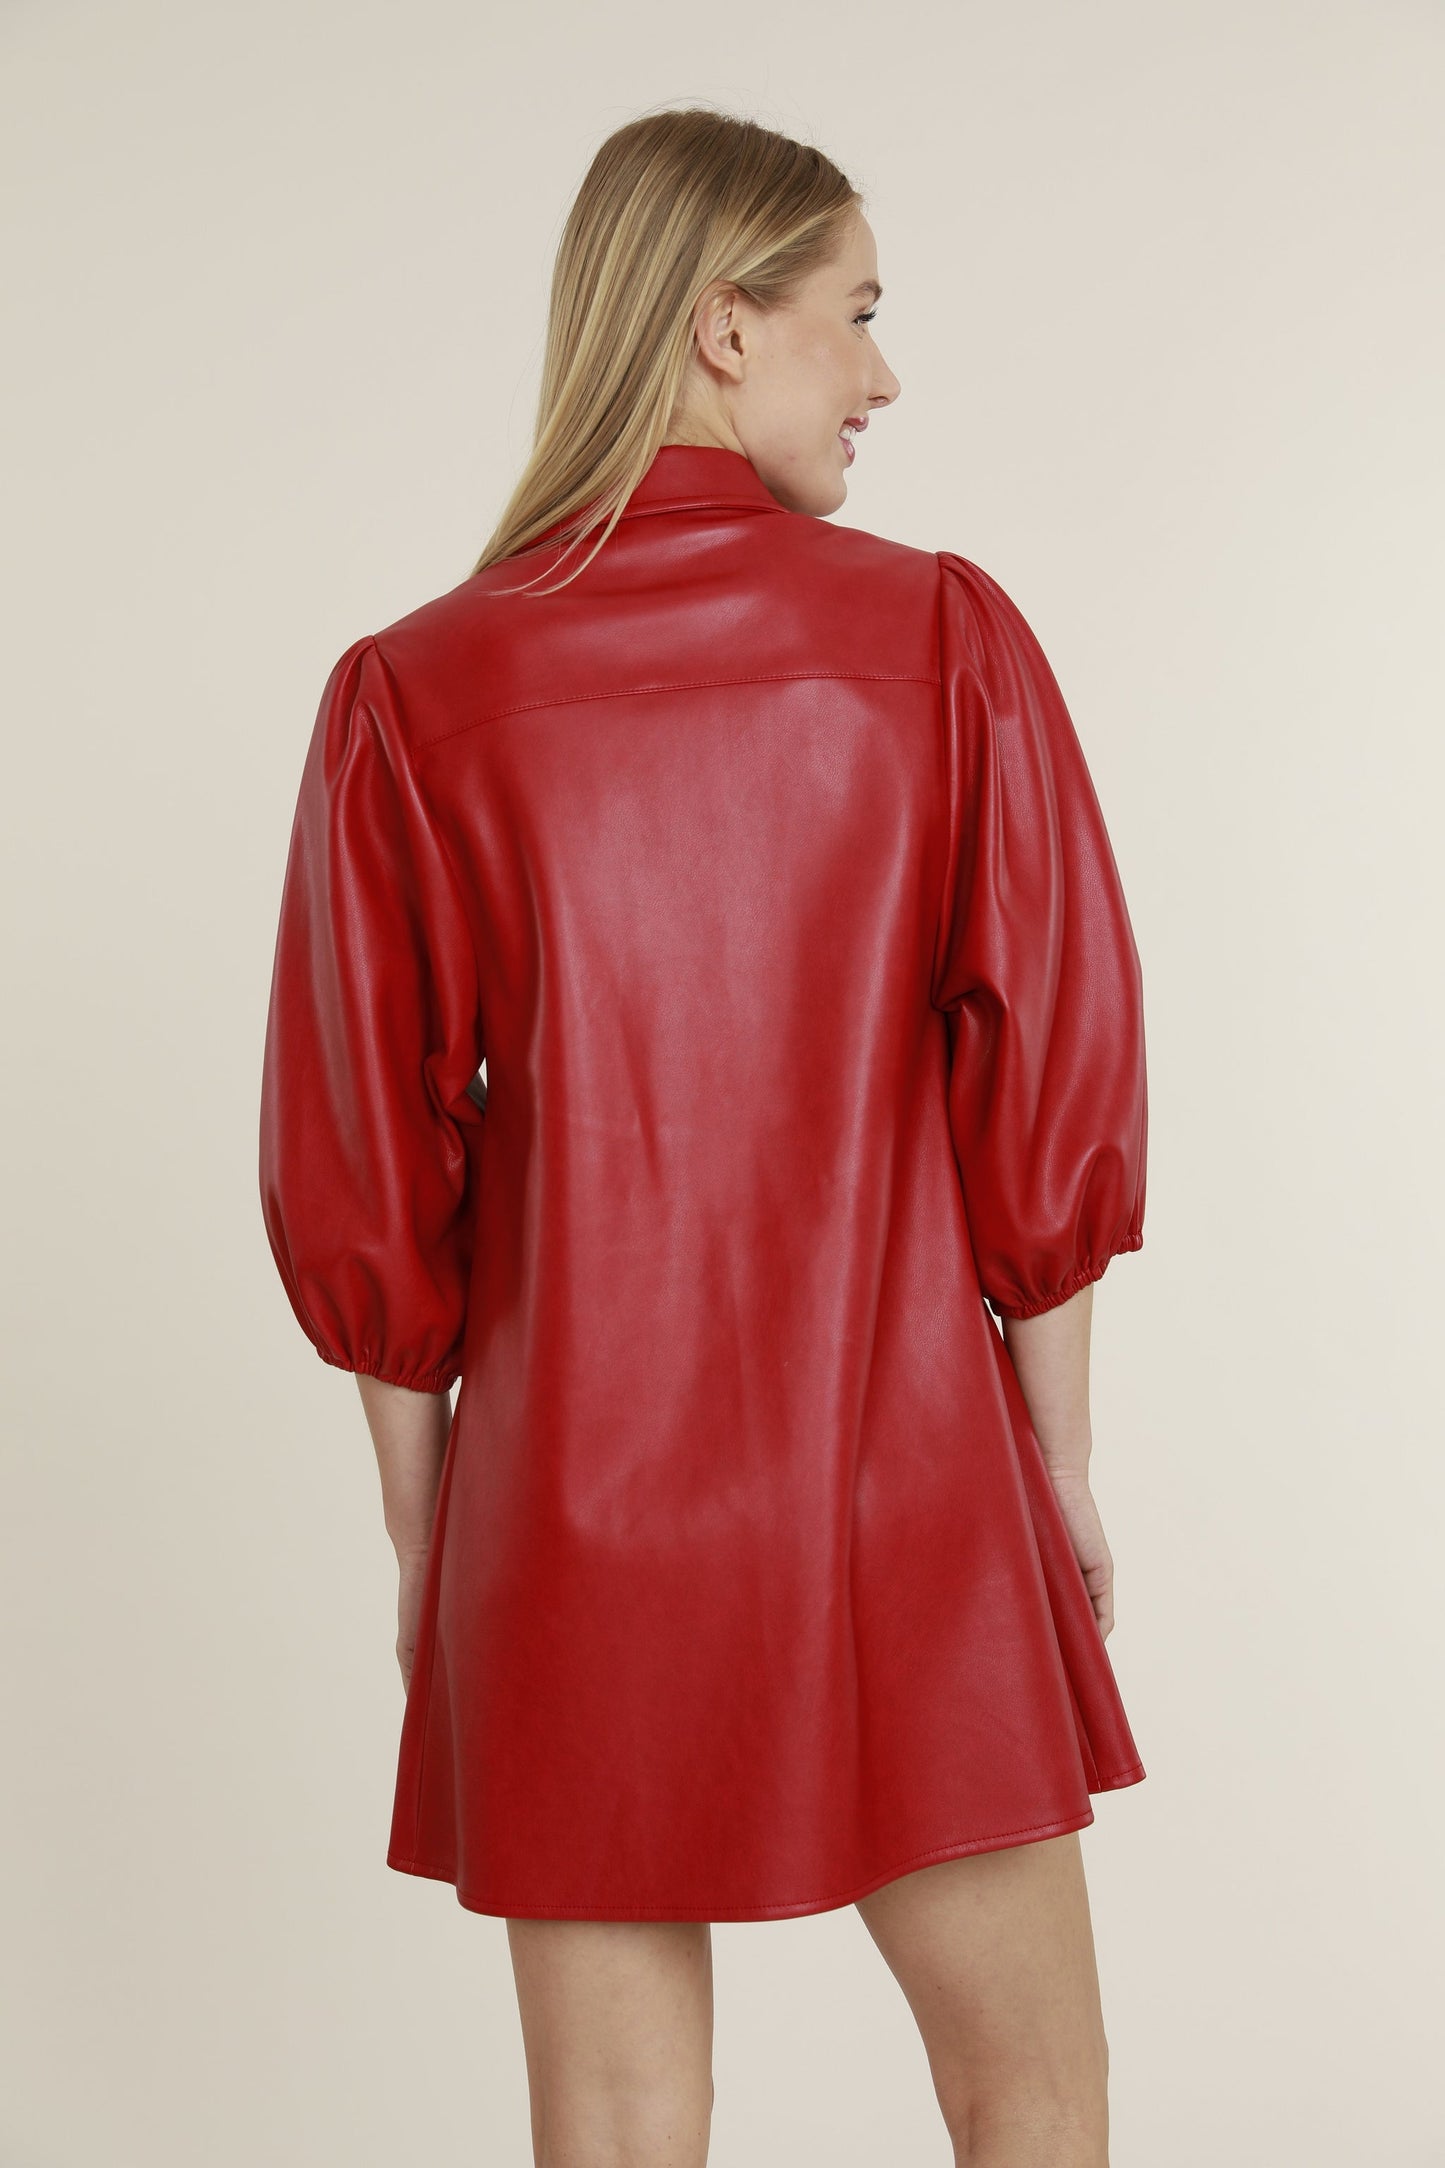 Dolce Cabo Vegan Leather Tunic/Dress- Red